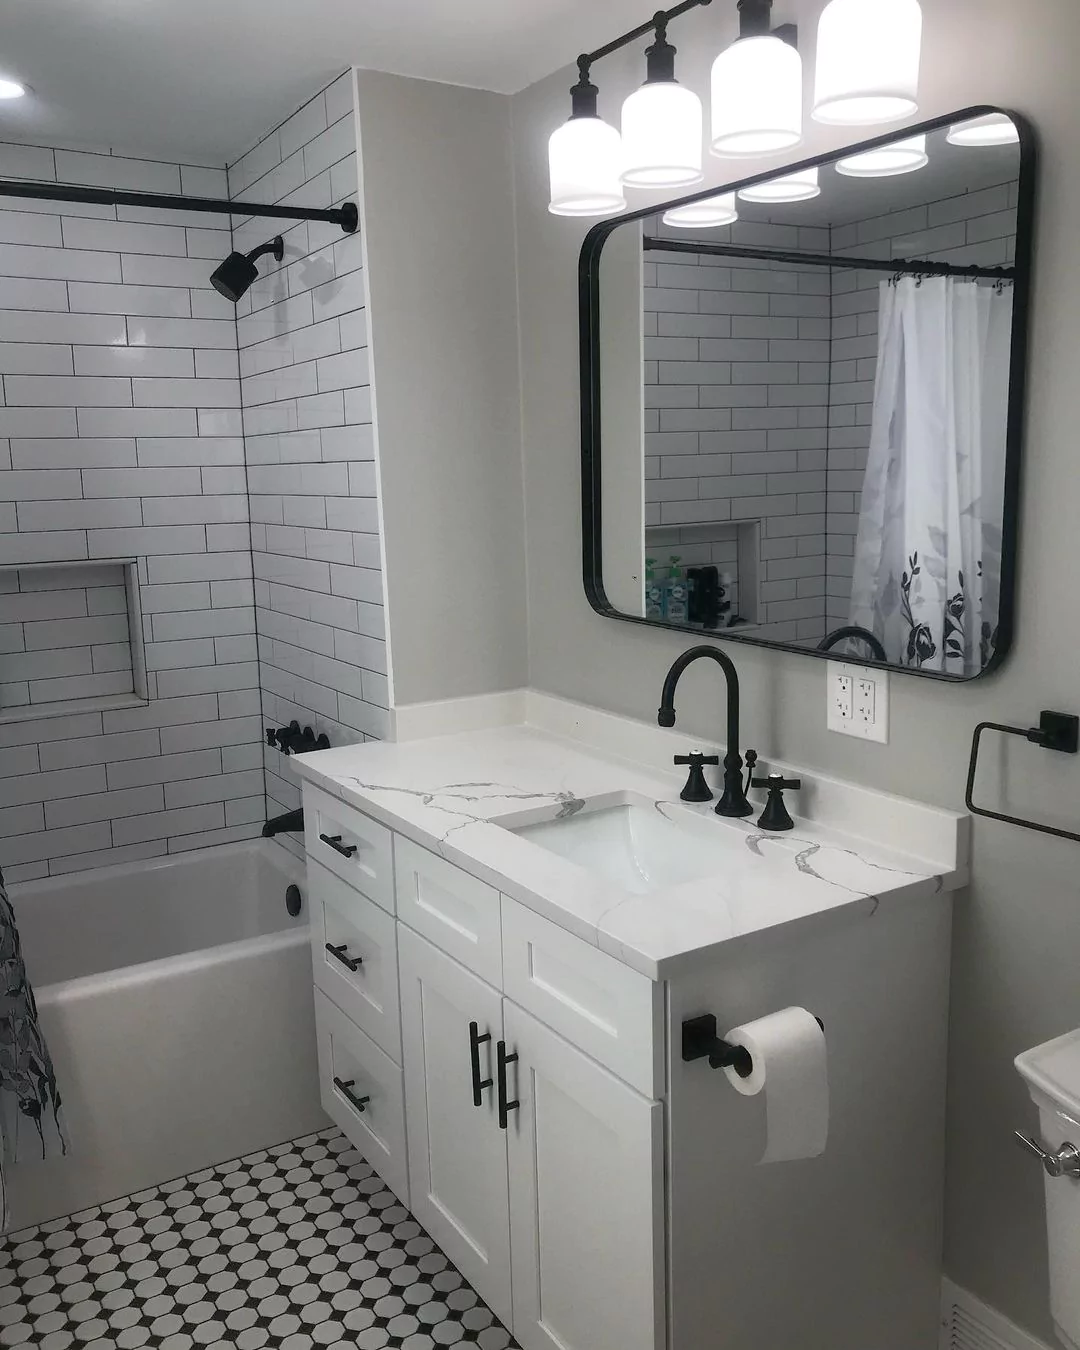 Chicagoland Remodeling Bathroom North Brook Il 1 4 Chicagoland Remodeling | Bathroom Remodeling | Kitchens Remodeling | Roofing | Siding